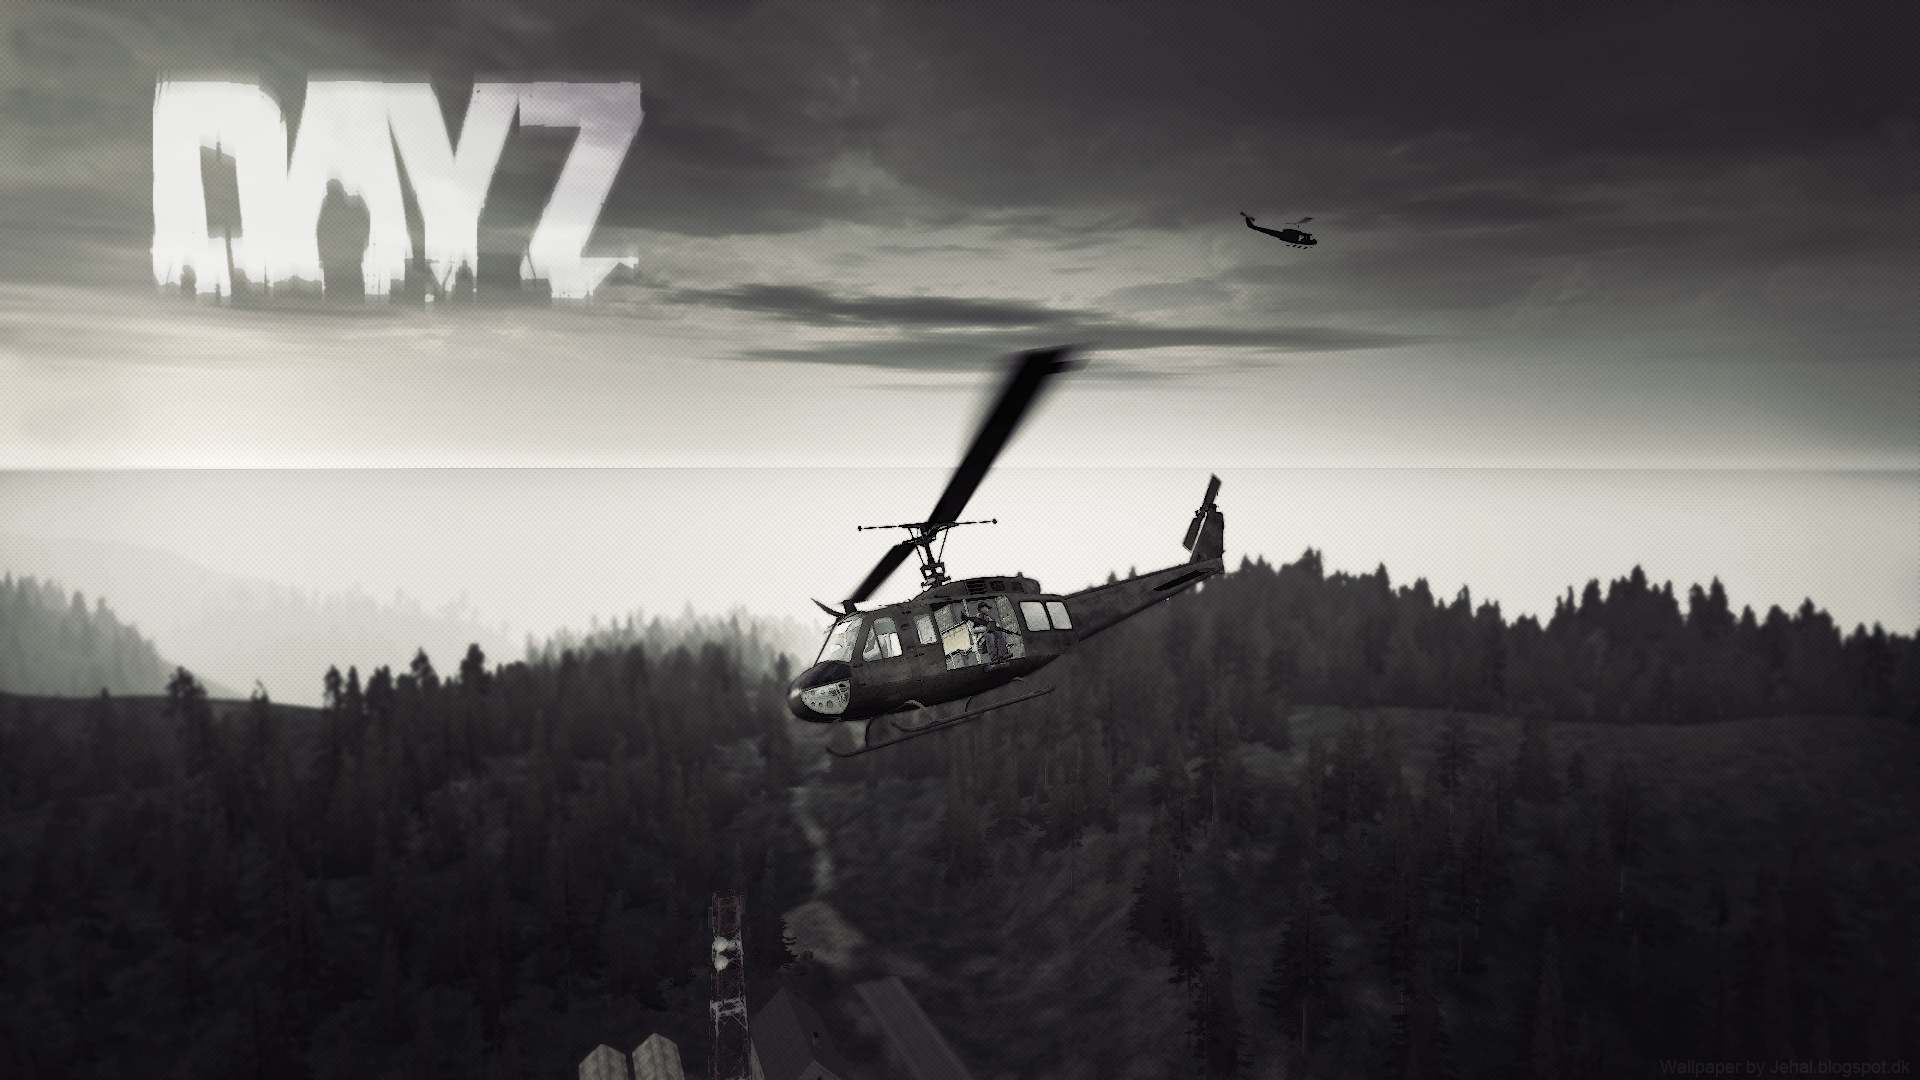 dayz_wallpaper_panthera___helicopters_by_jehal-d5lir1z.png